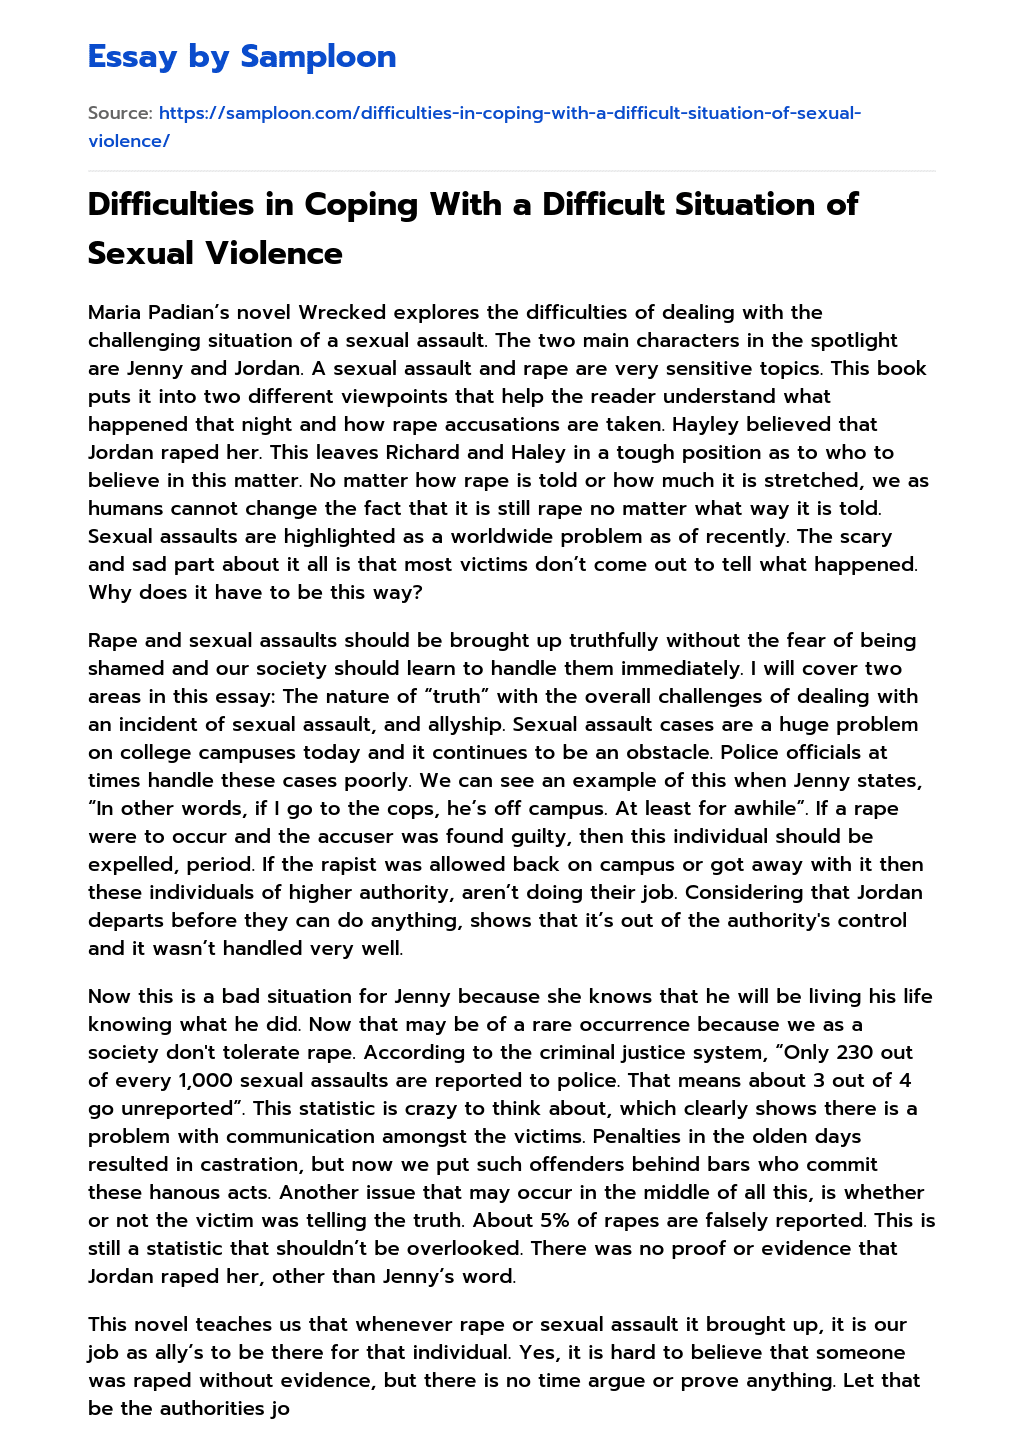 Difficulties in Coping With a Difficult Situation of Sexual Violence essay